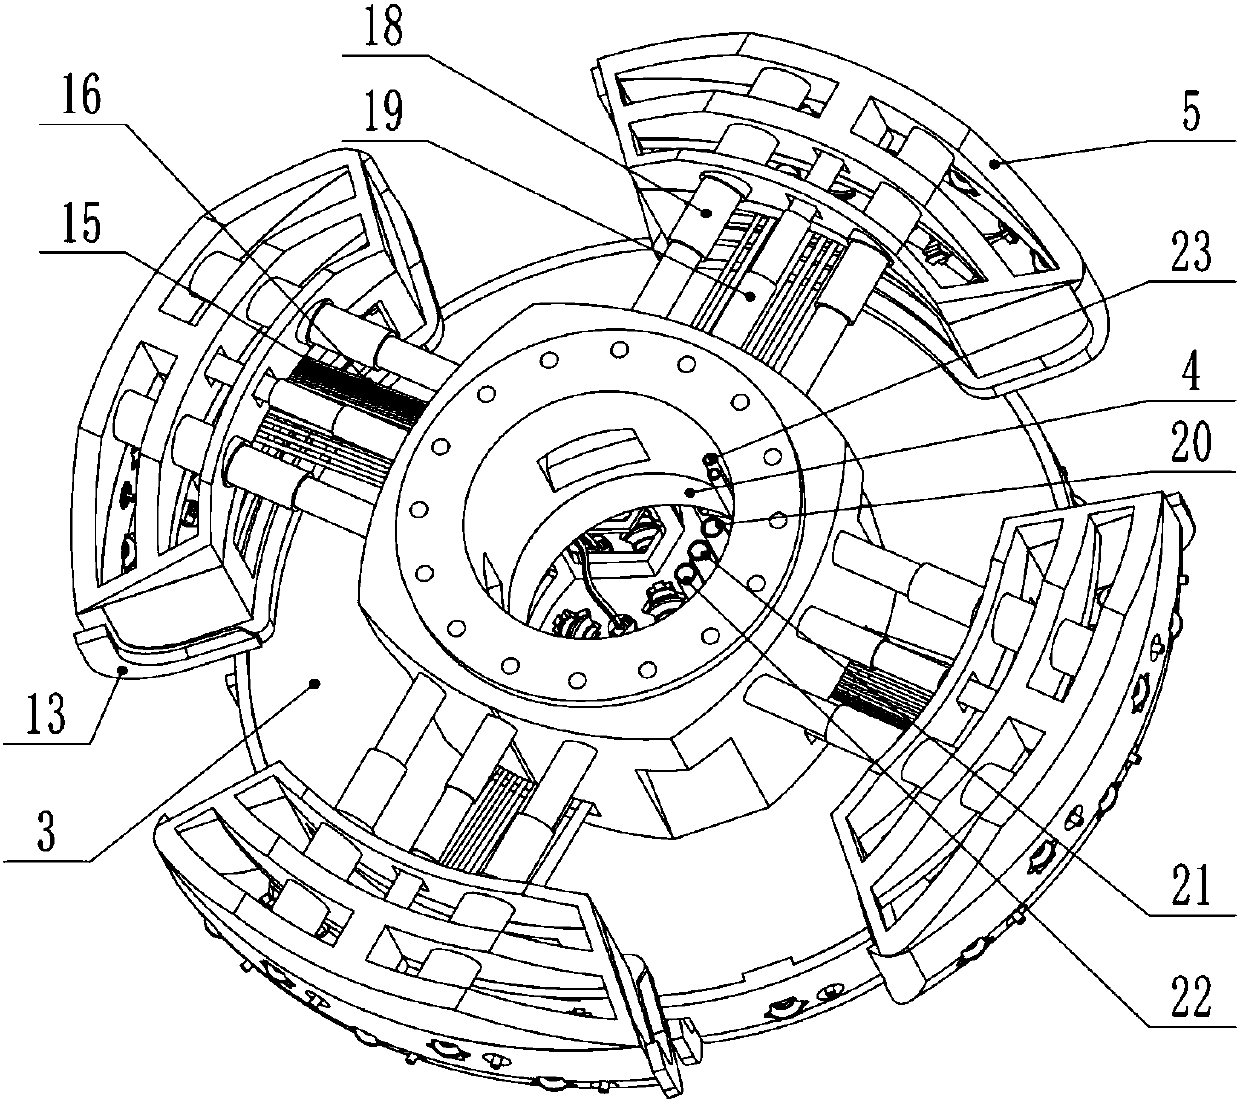 Full-fracture-surface hard-rock tunneling machine cutter disc and tunneling method